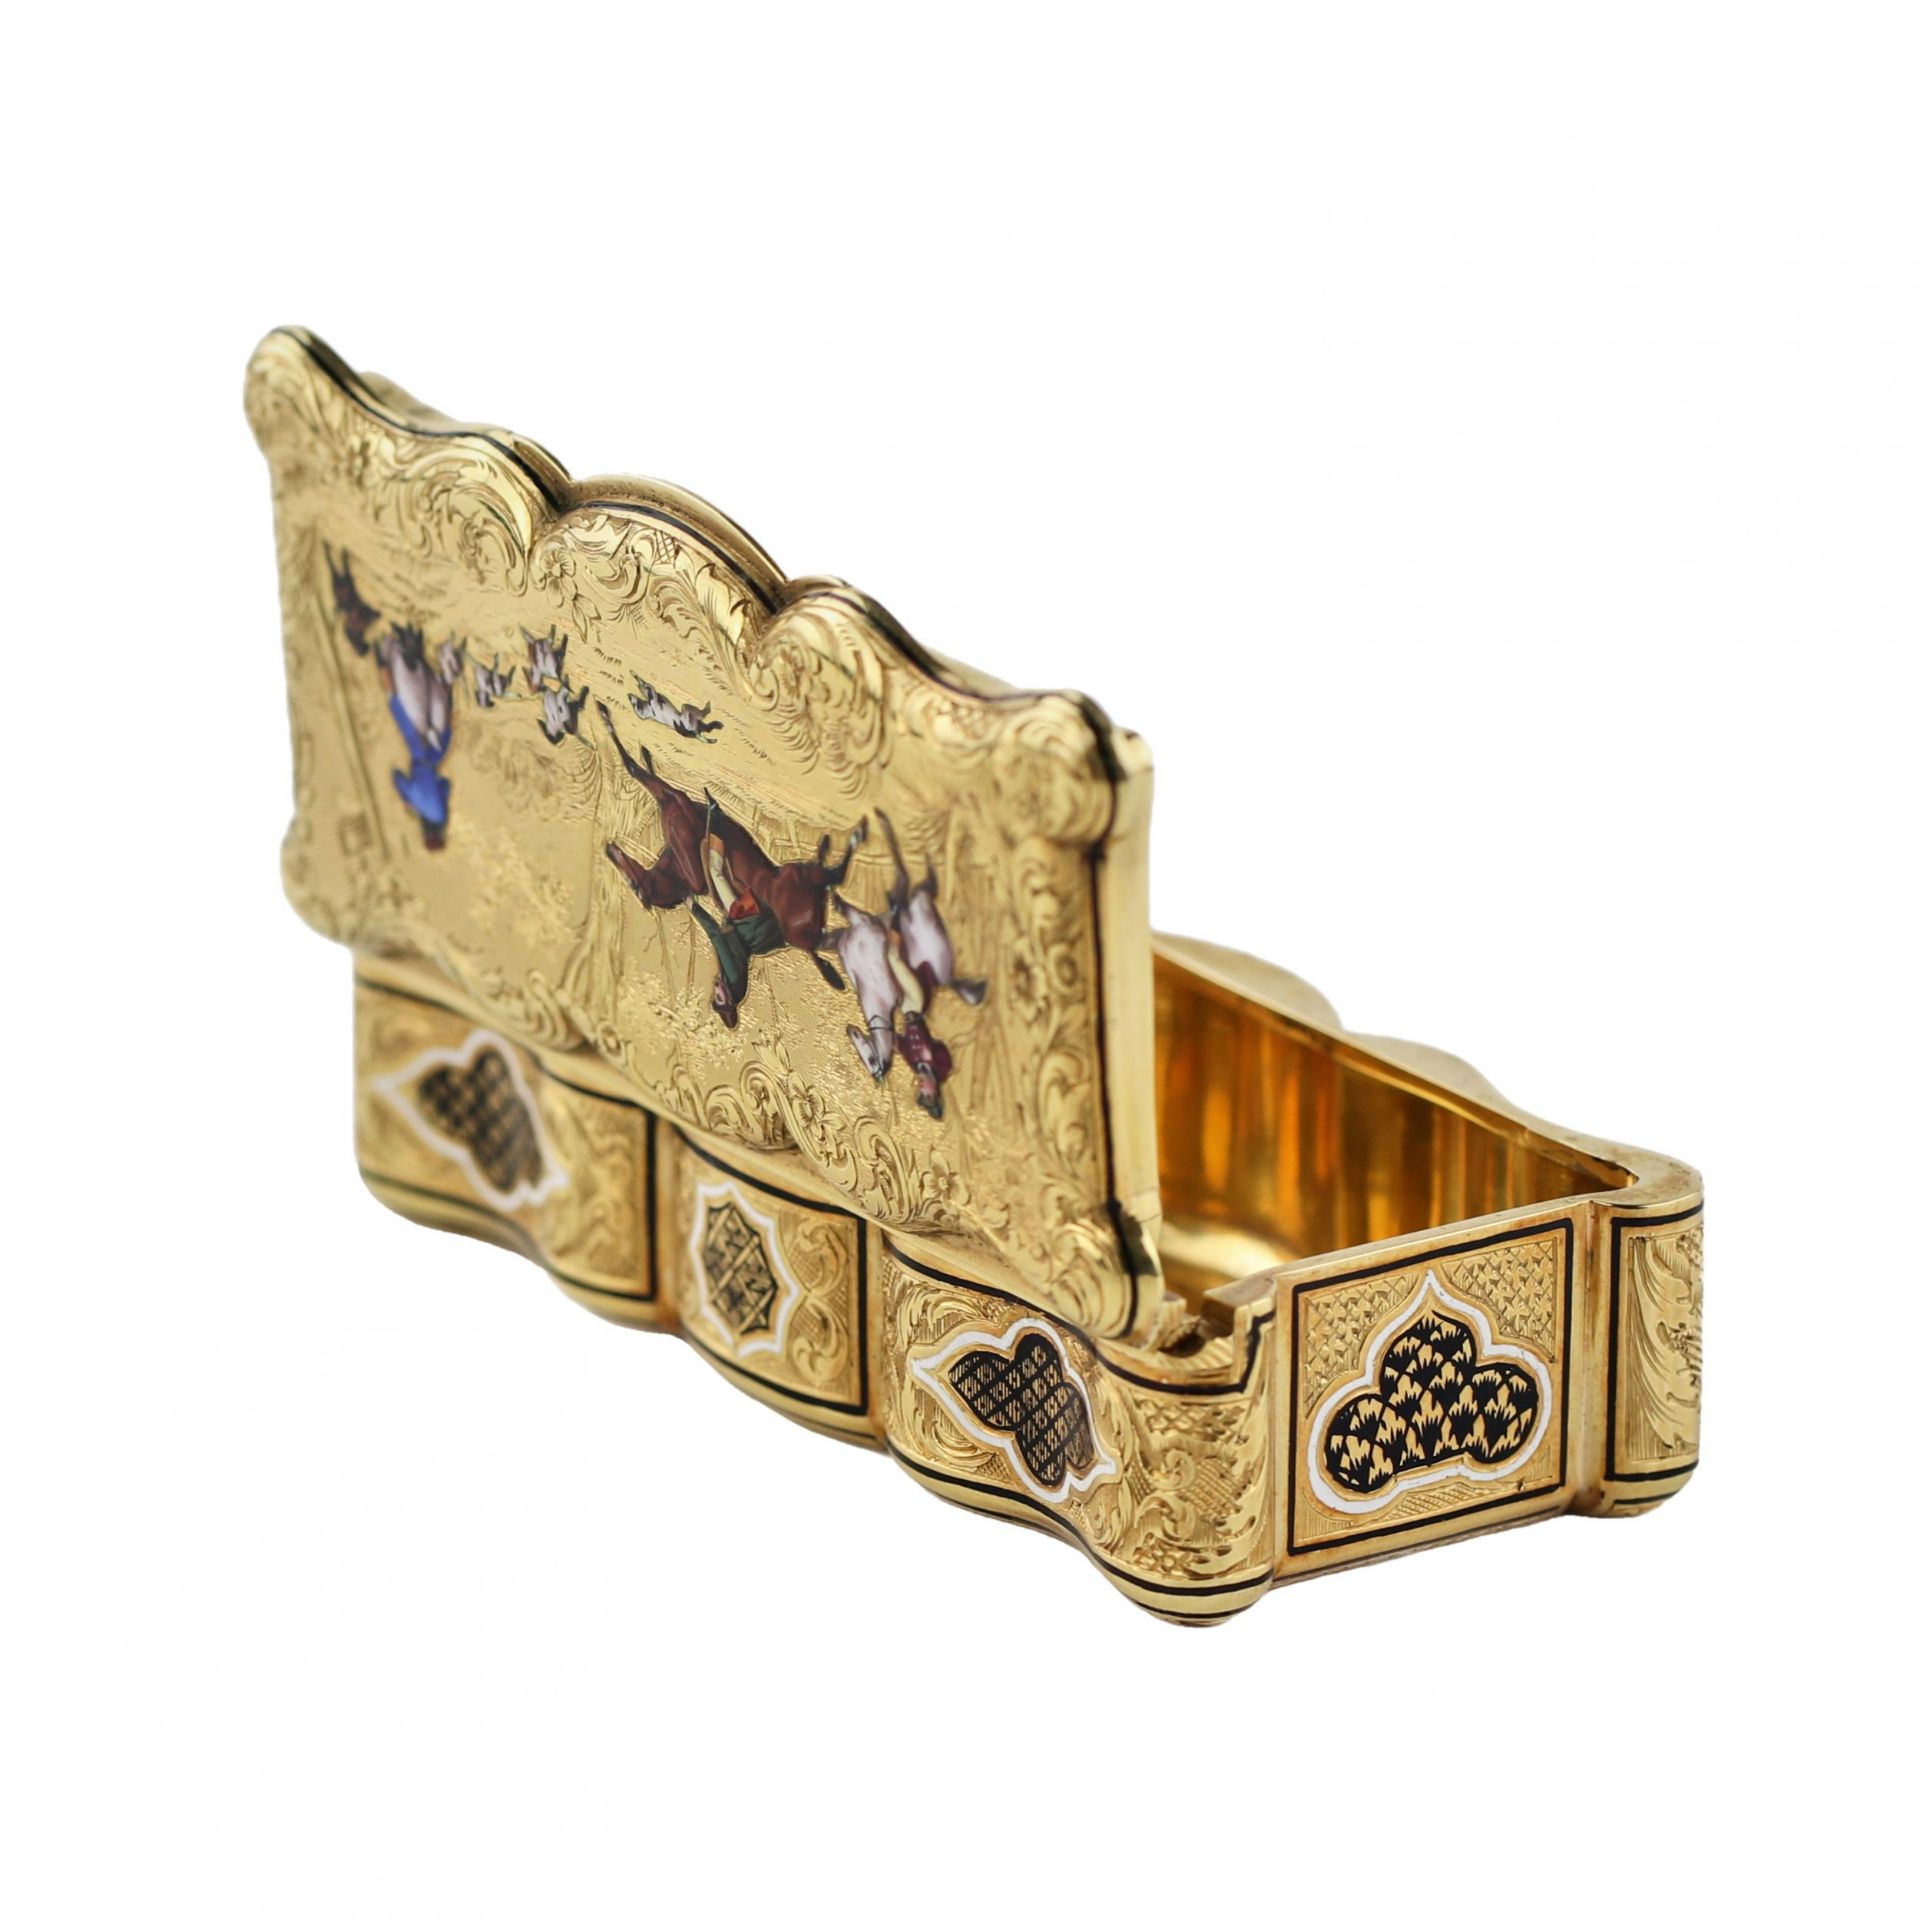 18K gold enameled snuffbox with scenes of equestrian hunting. French work of the 19th century. - Bild 8 aus 10